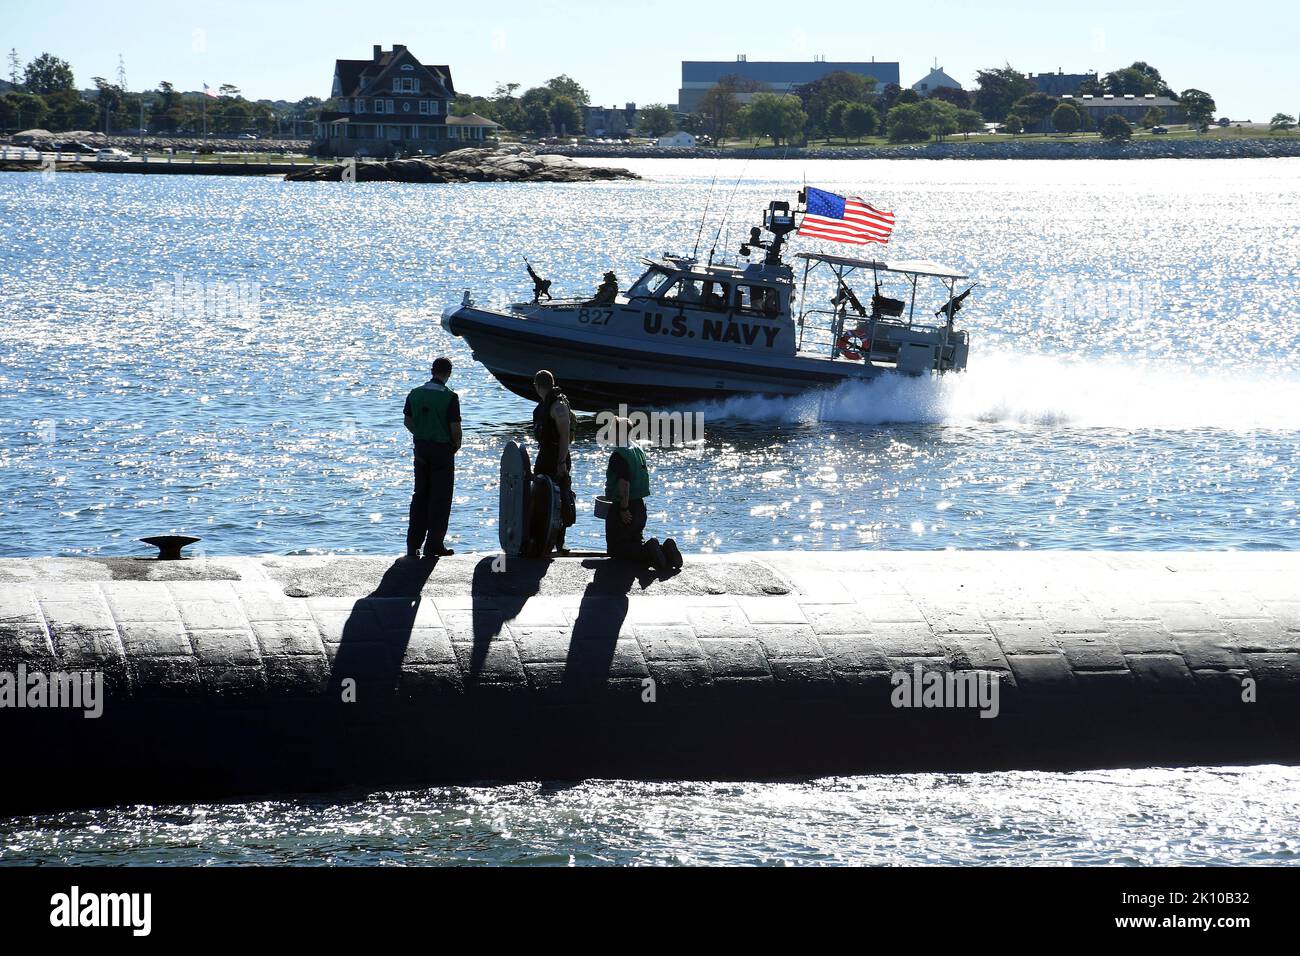 Groton, United States. 02 September, 2022. A U.S. Navy patrol boat escorts the nuclear-power Los Angeles-class fast attack submarine USS San Juan along the Thames River as it arrives to homeport at Naval Submarine Base New London, September 2, 2022 in Groton, Connecticut. Credit: MCS Joshua Karsten/U.S. Marines/Alamy Live News Stock Photo